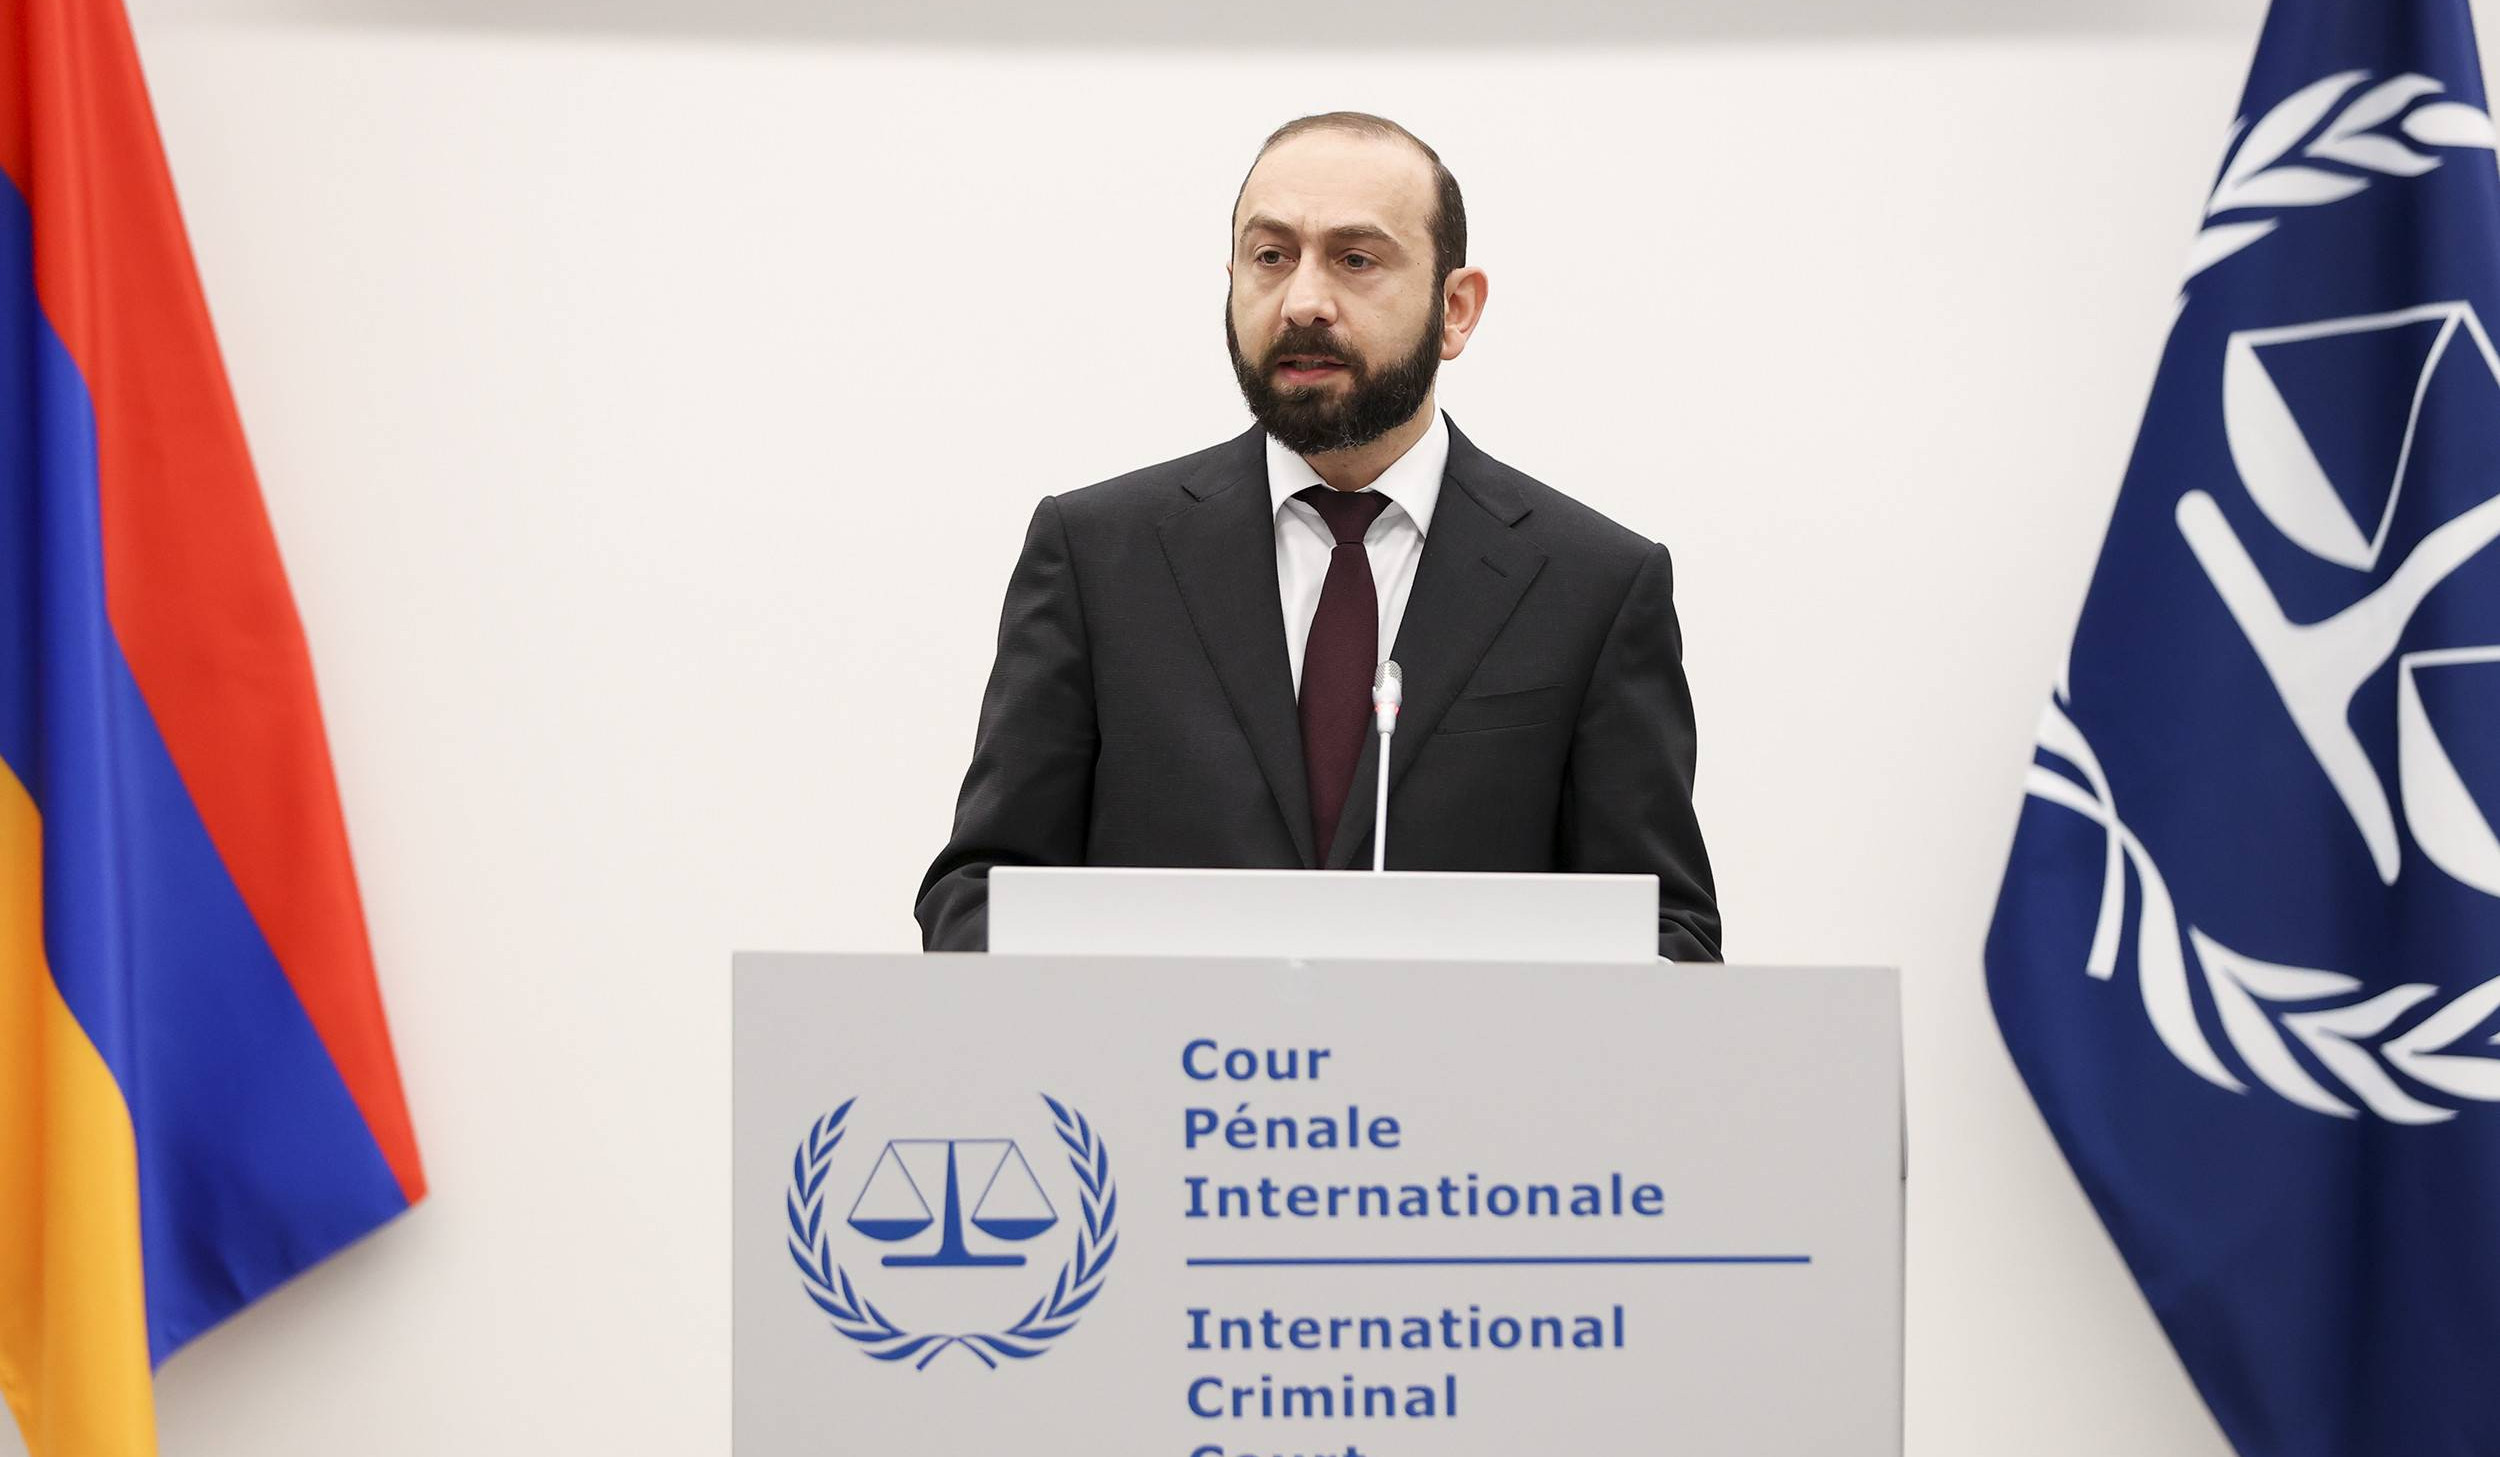 We are convinced that Rome Statute among other mechanisms has real potential to prevent any further escalation and atrocities, Mirzoyan